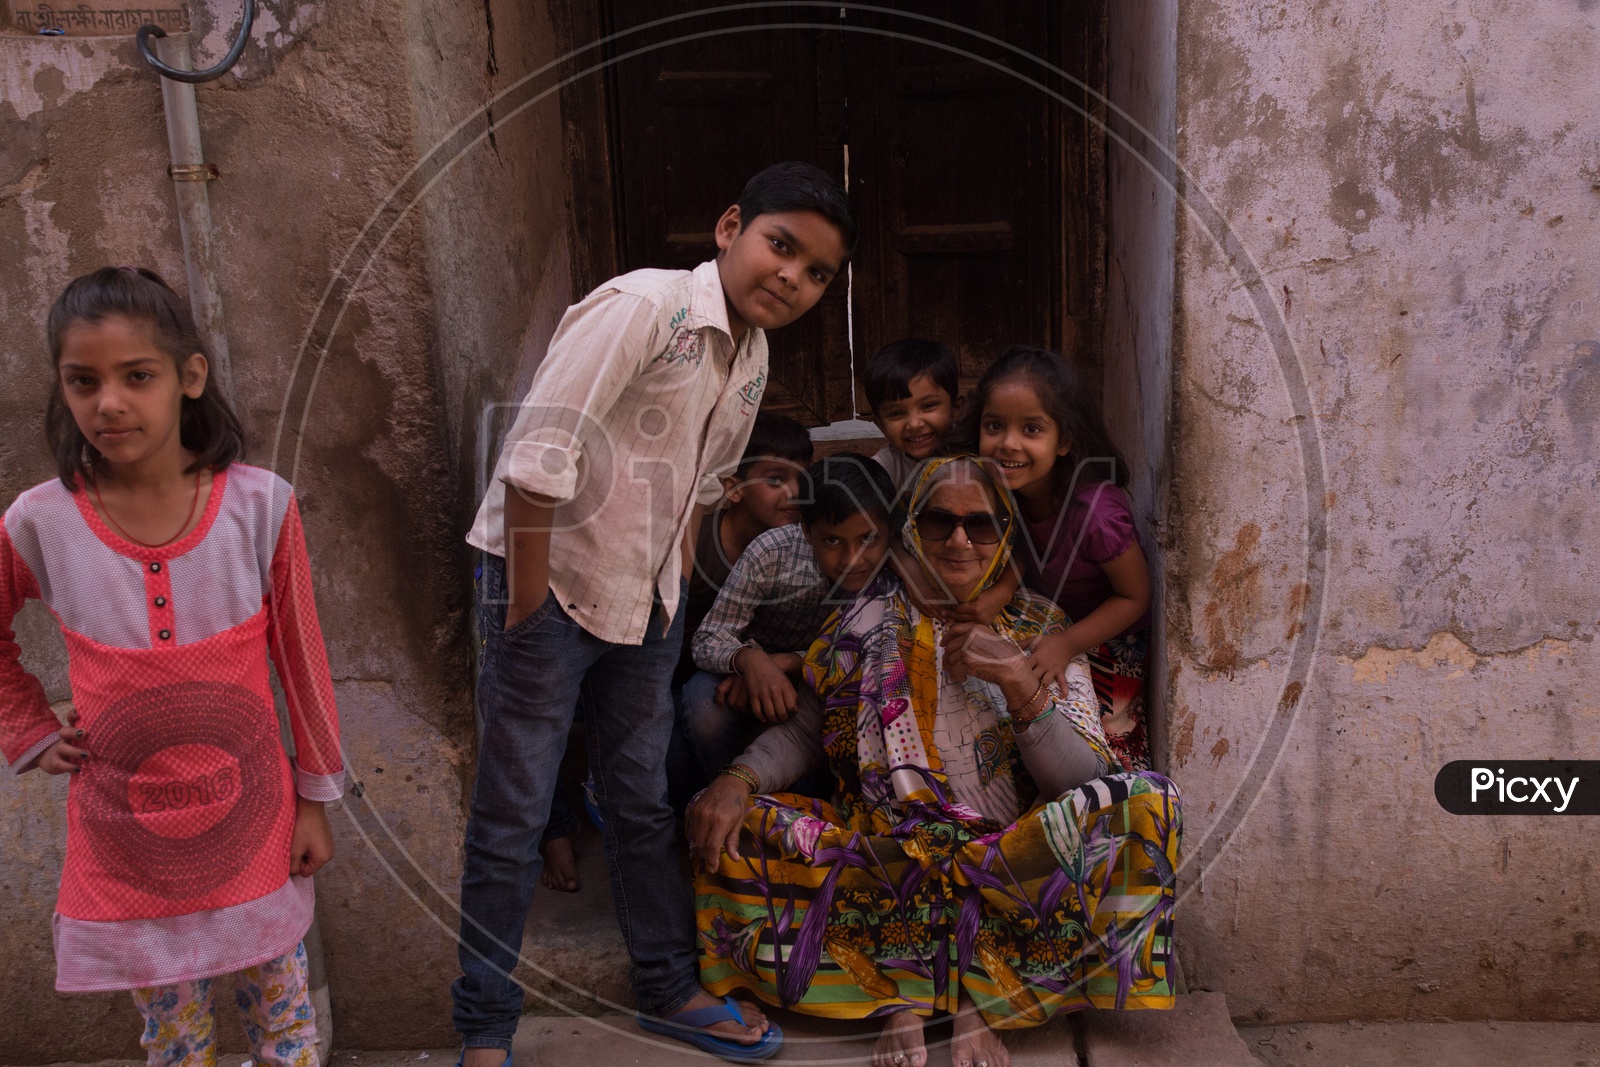 An old woman along with the children posing for a photograph